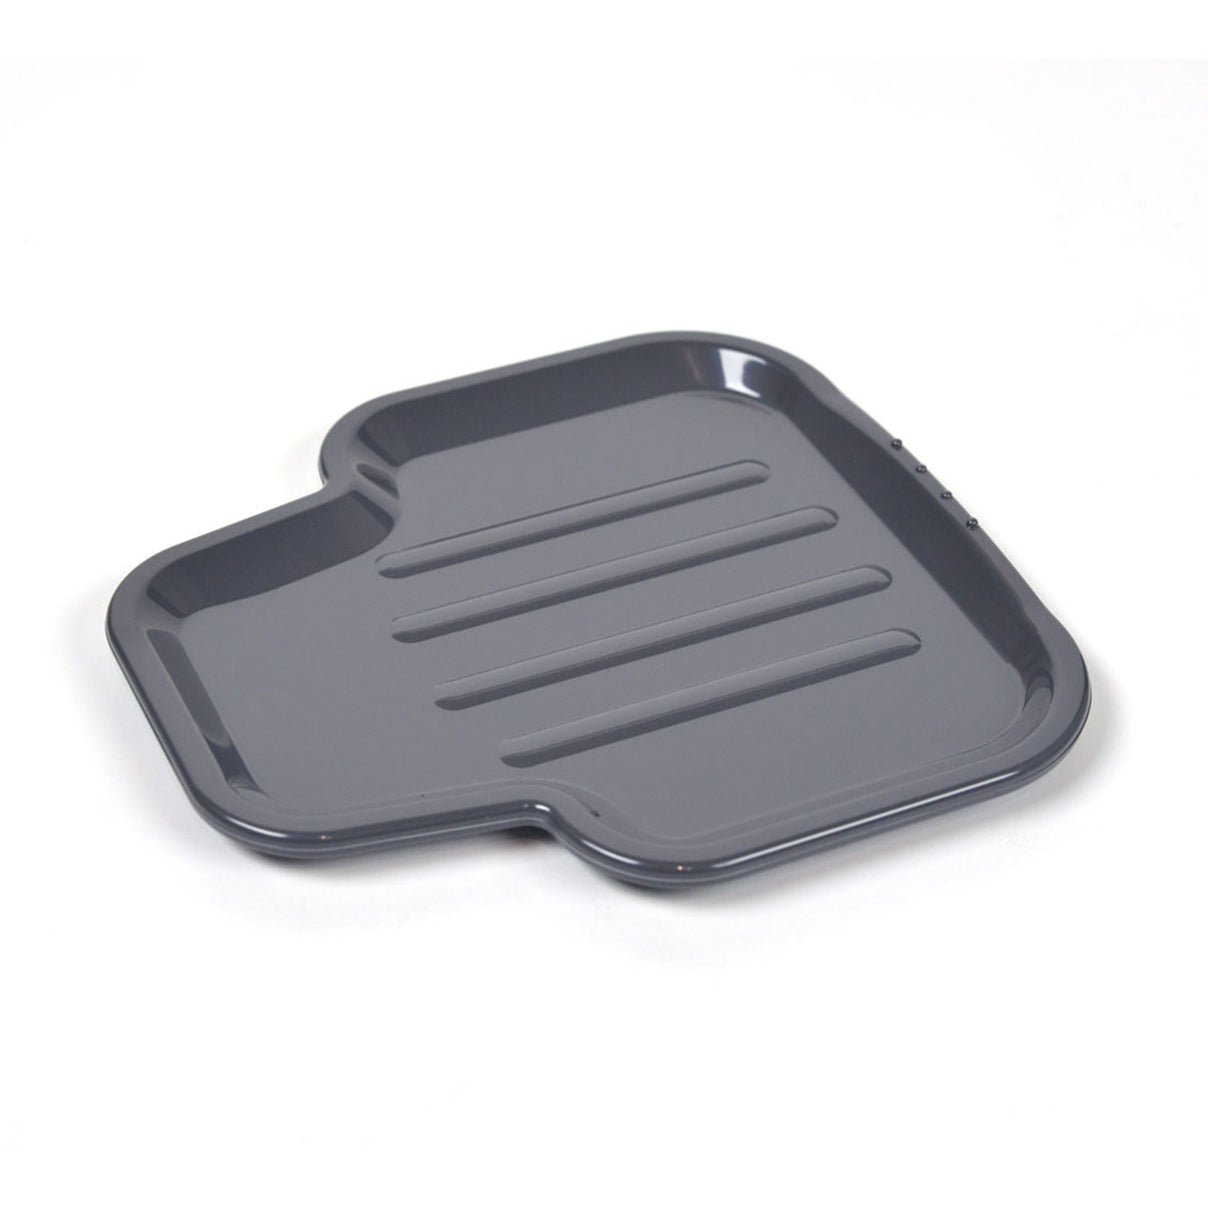 The Gray Drip Tray is compatible with Greenstar® Pro in Gray (GS-P502).